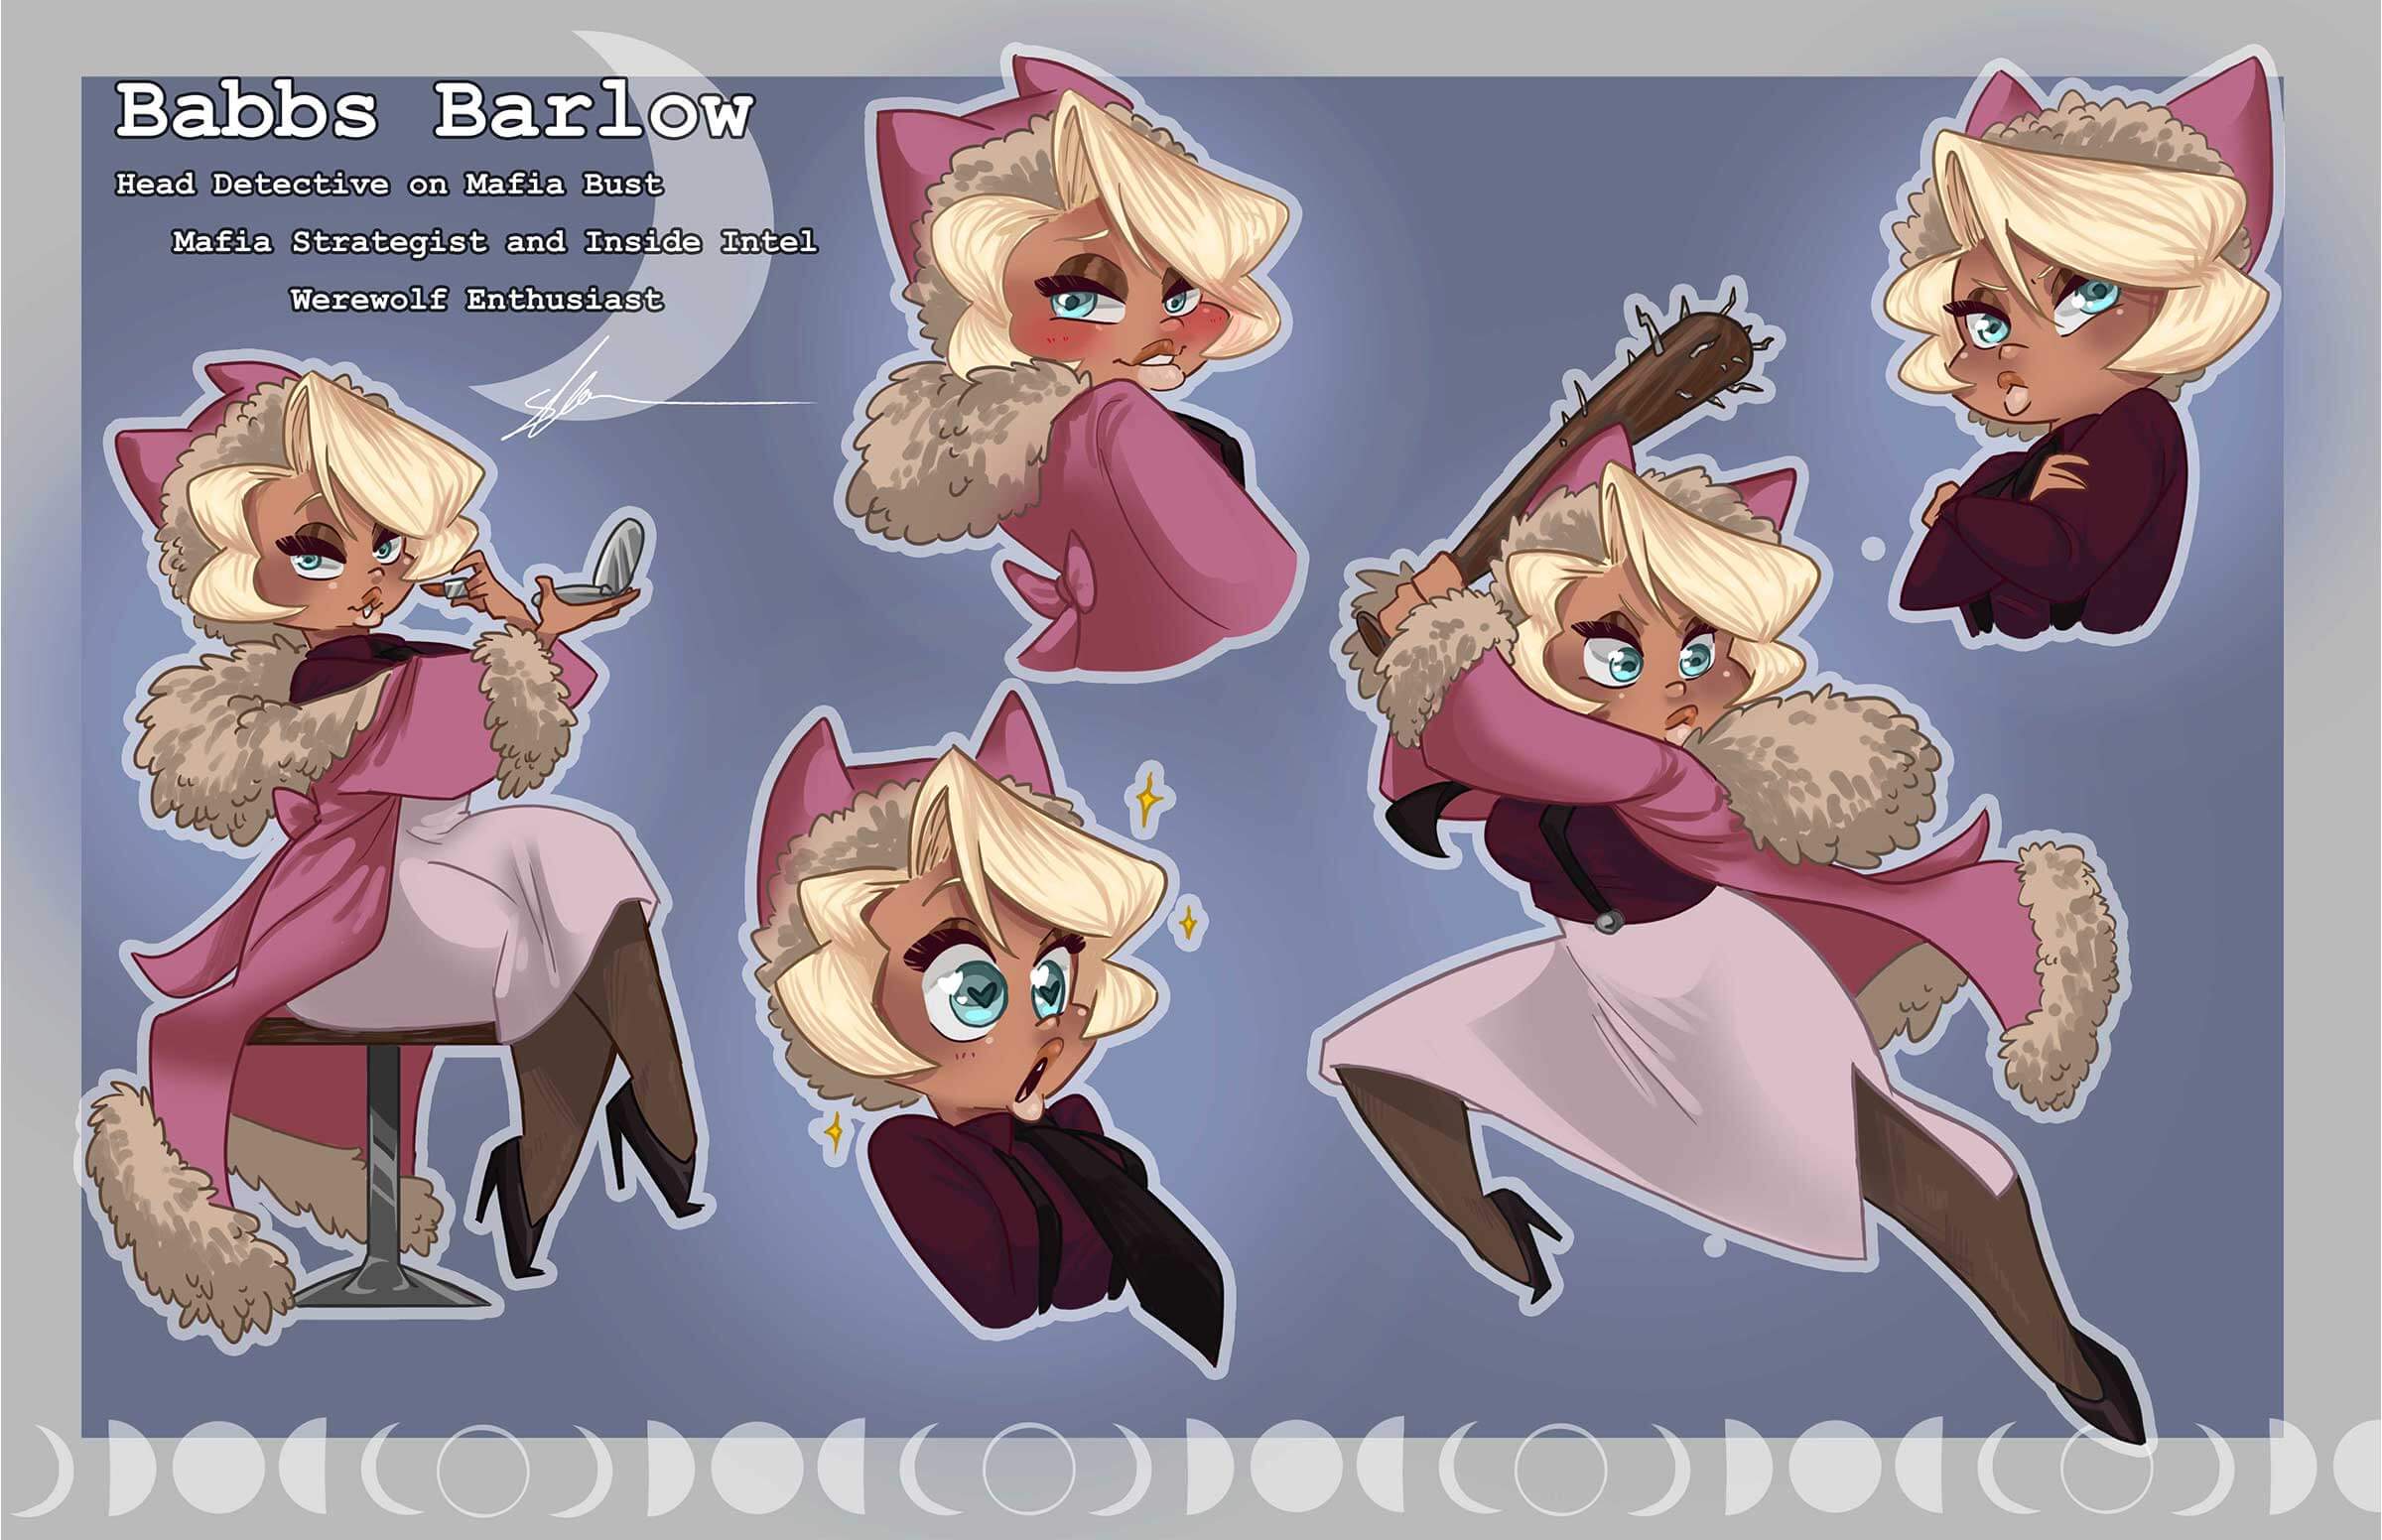 Character art of Babbs Barlow, a head detective and werewolf enthusiast. 